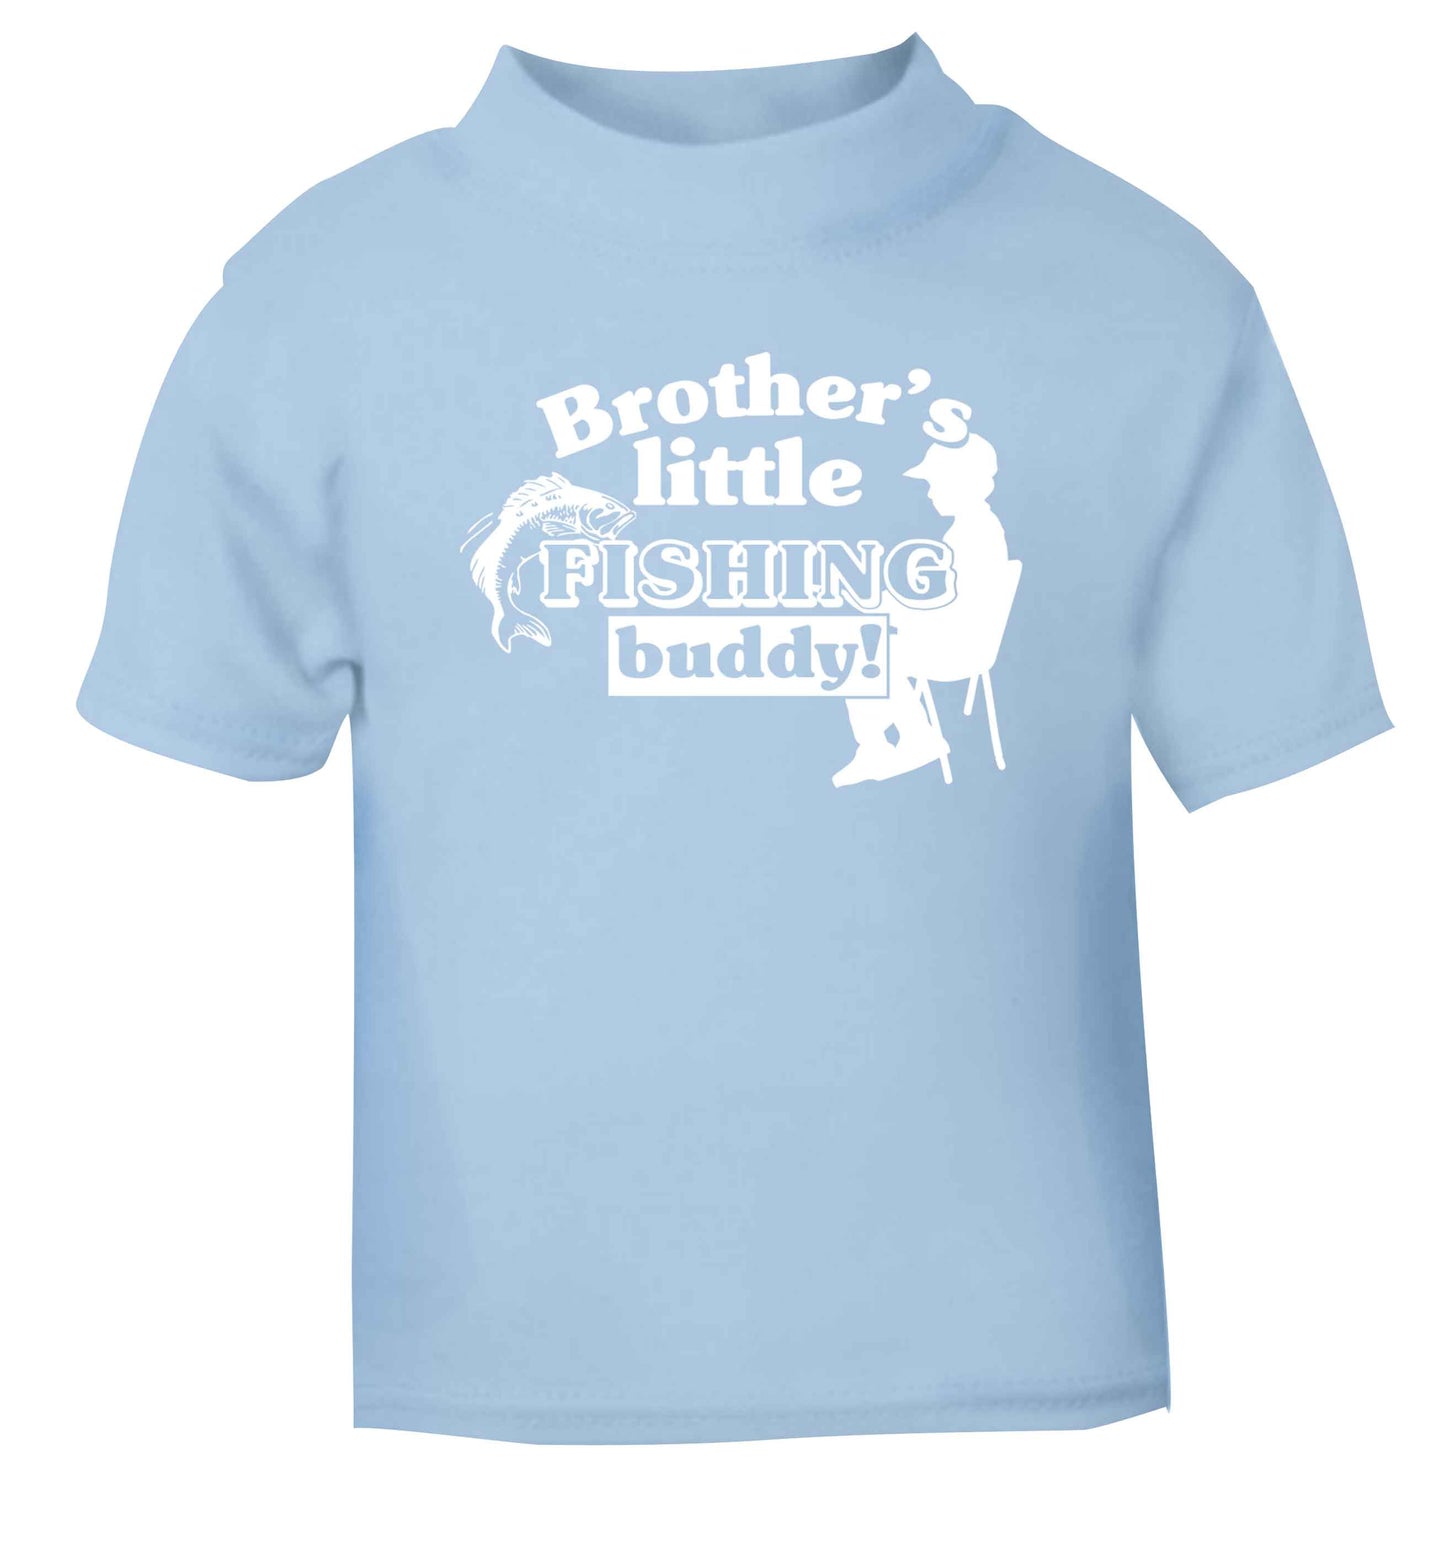 Brother's little fishing buddy light blue Baby Toddler Tshirt 2 Years